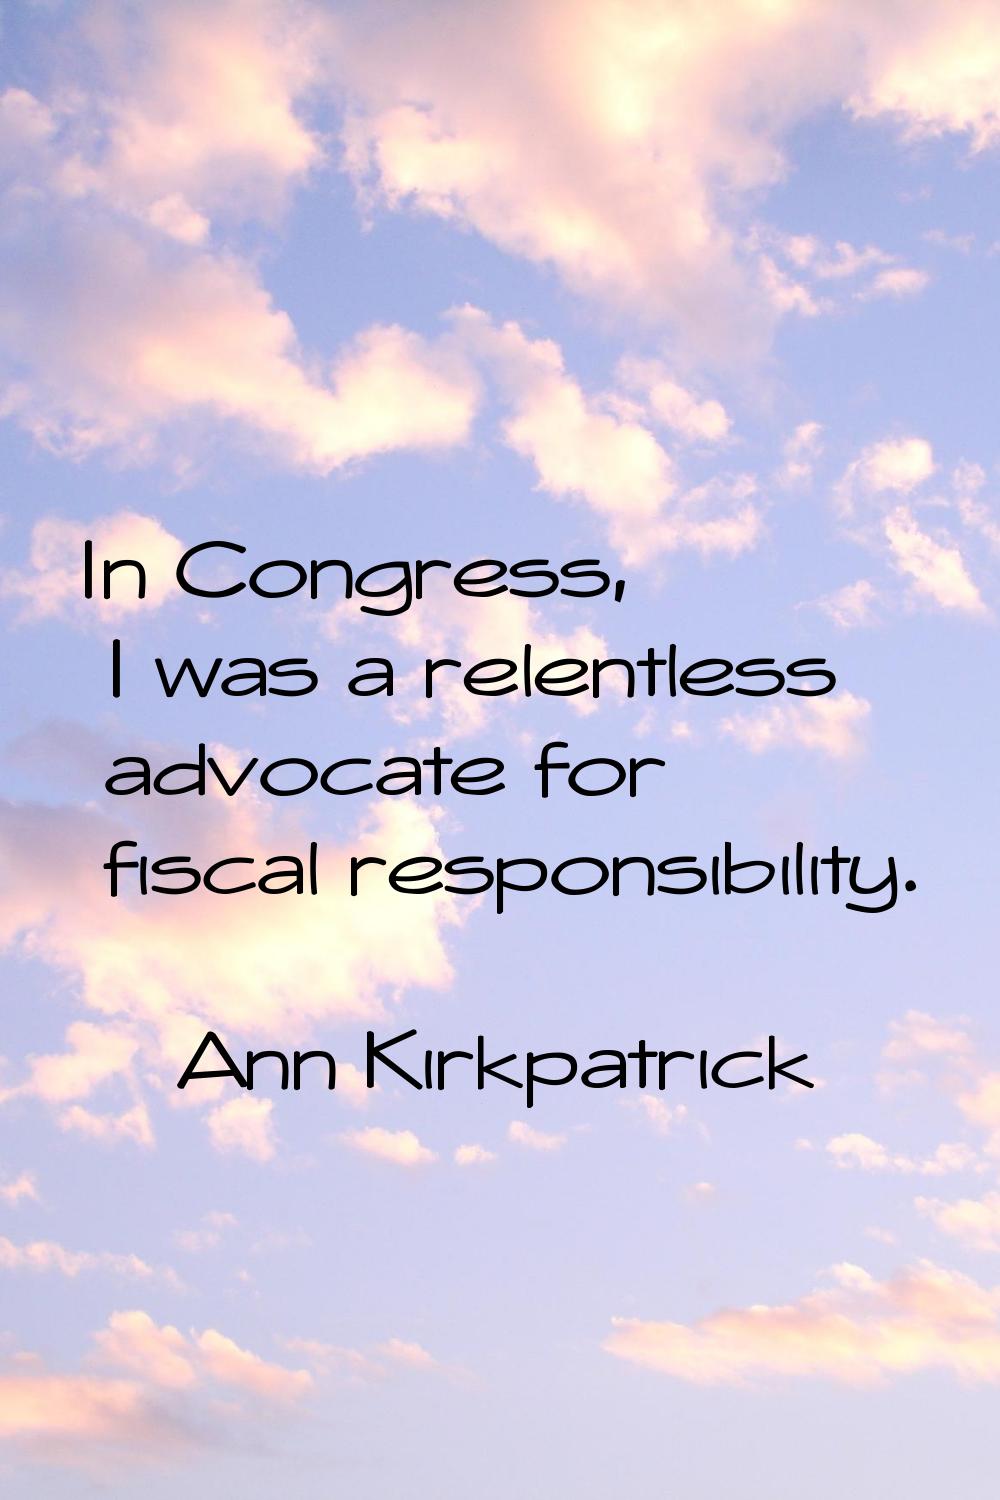 In Congress, I was a relentless advocate for fiscal responsibility.